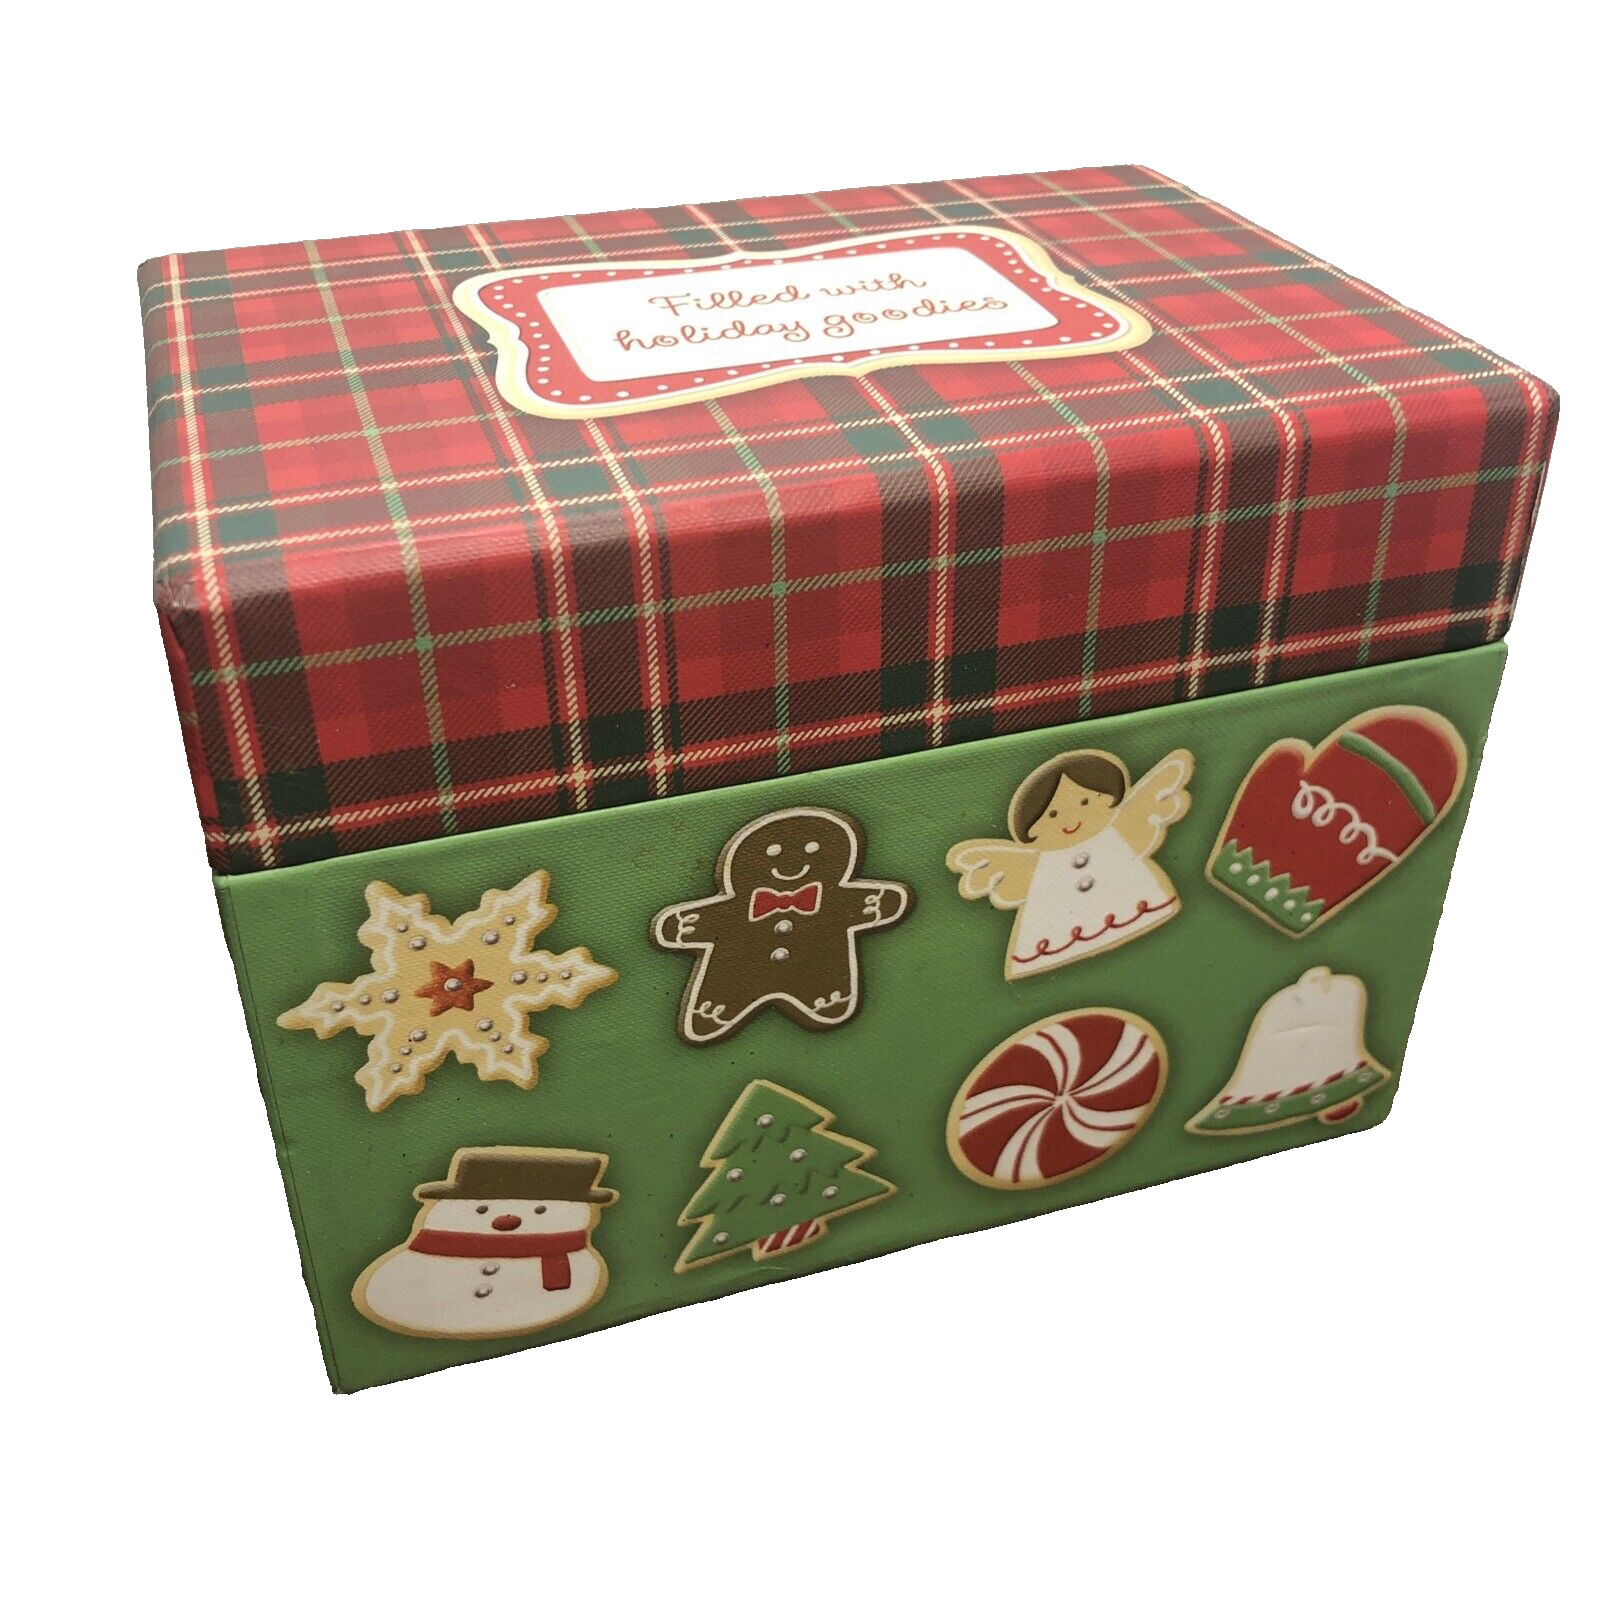 Hallmark Christmas “Filled With Holiday Goodies” Recipe Box W/ Divider Cards